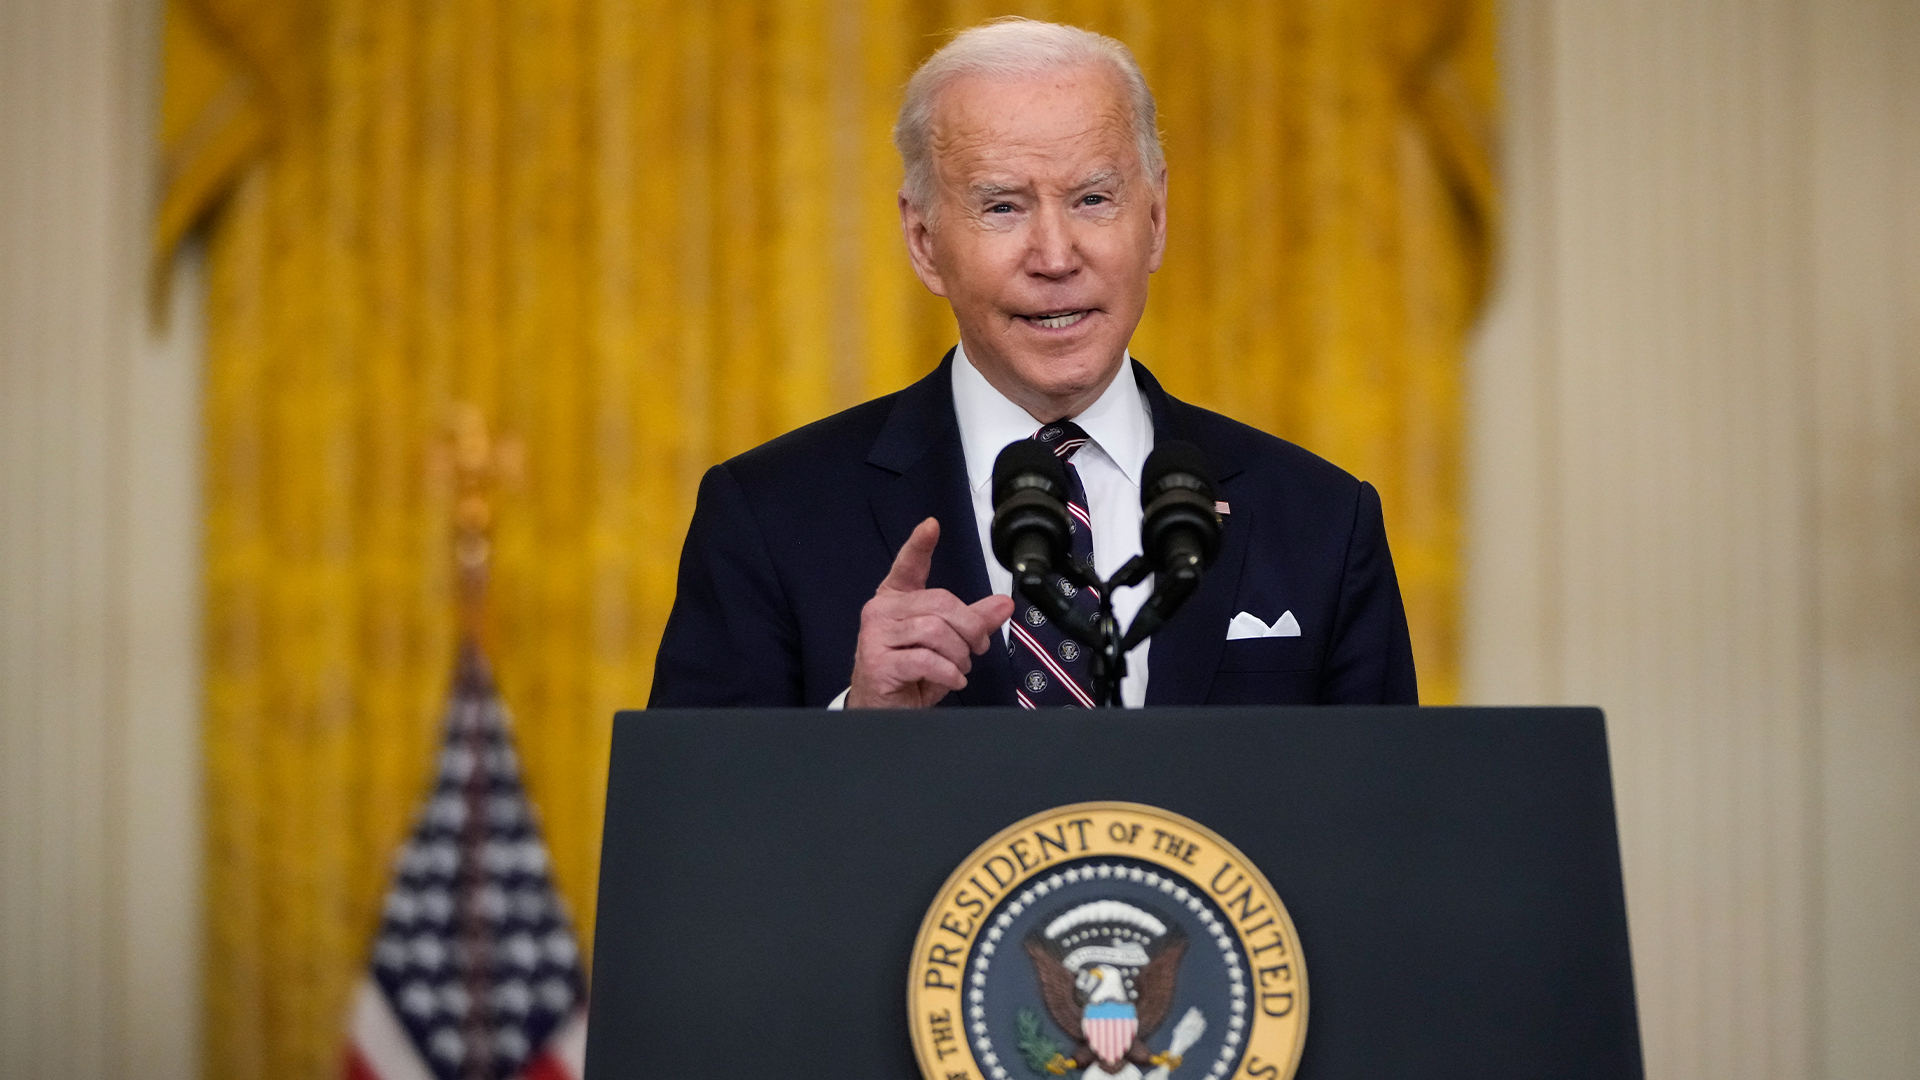 Biden Administration Plans To Forgive An Additional $6.2B In Student Loan Debt